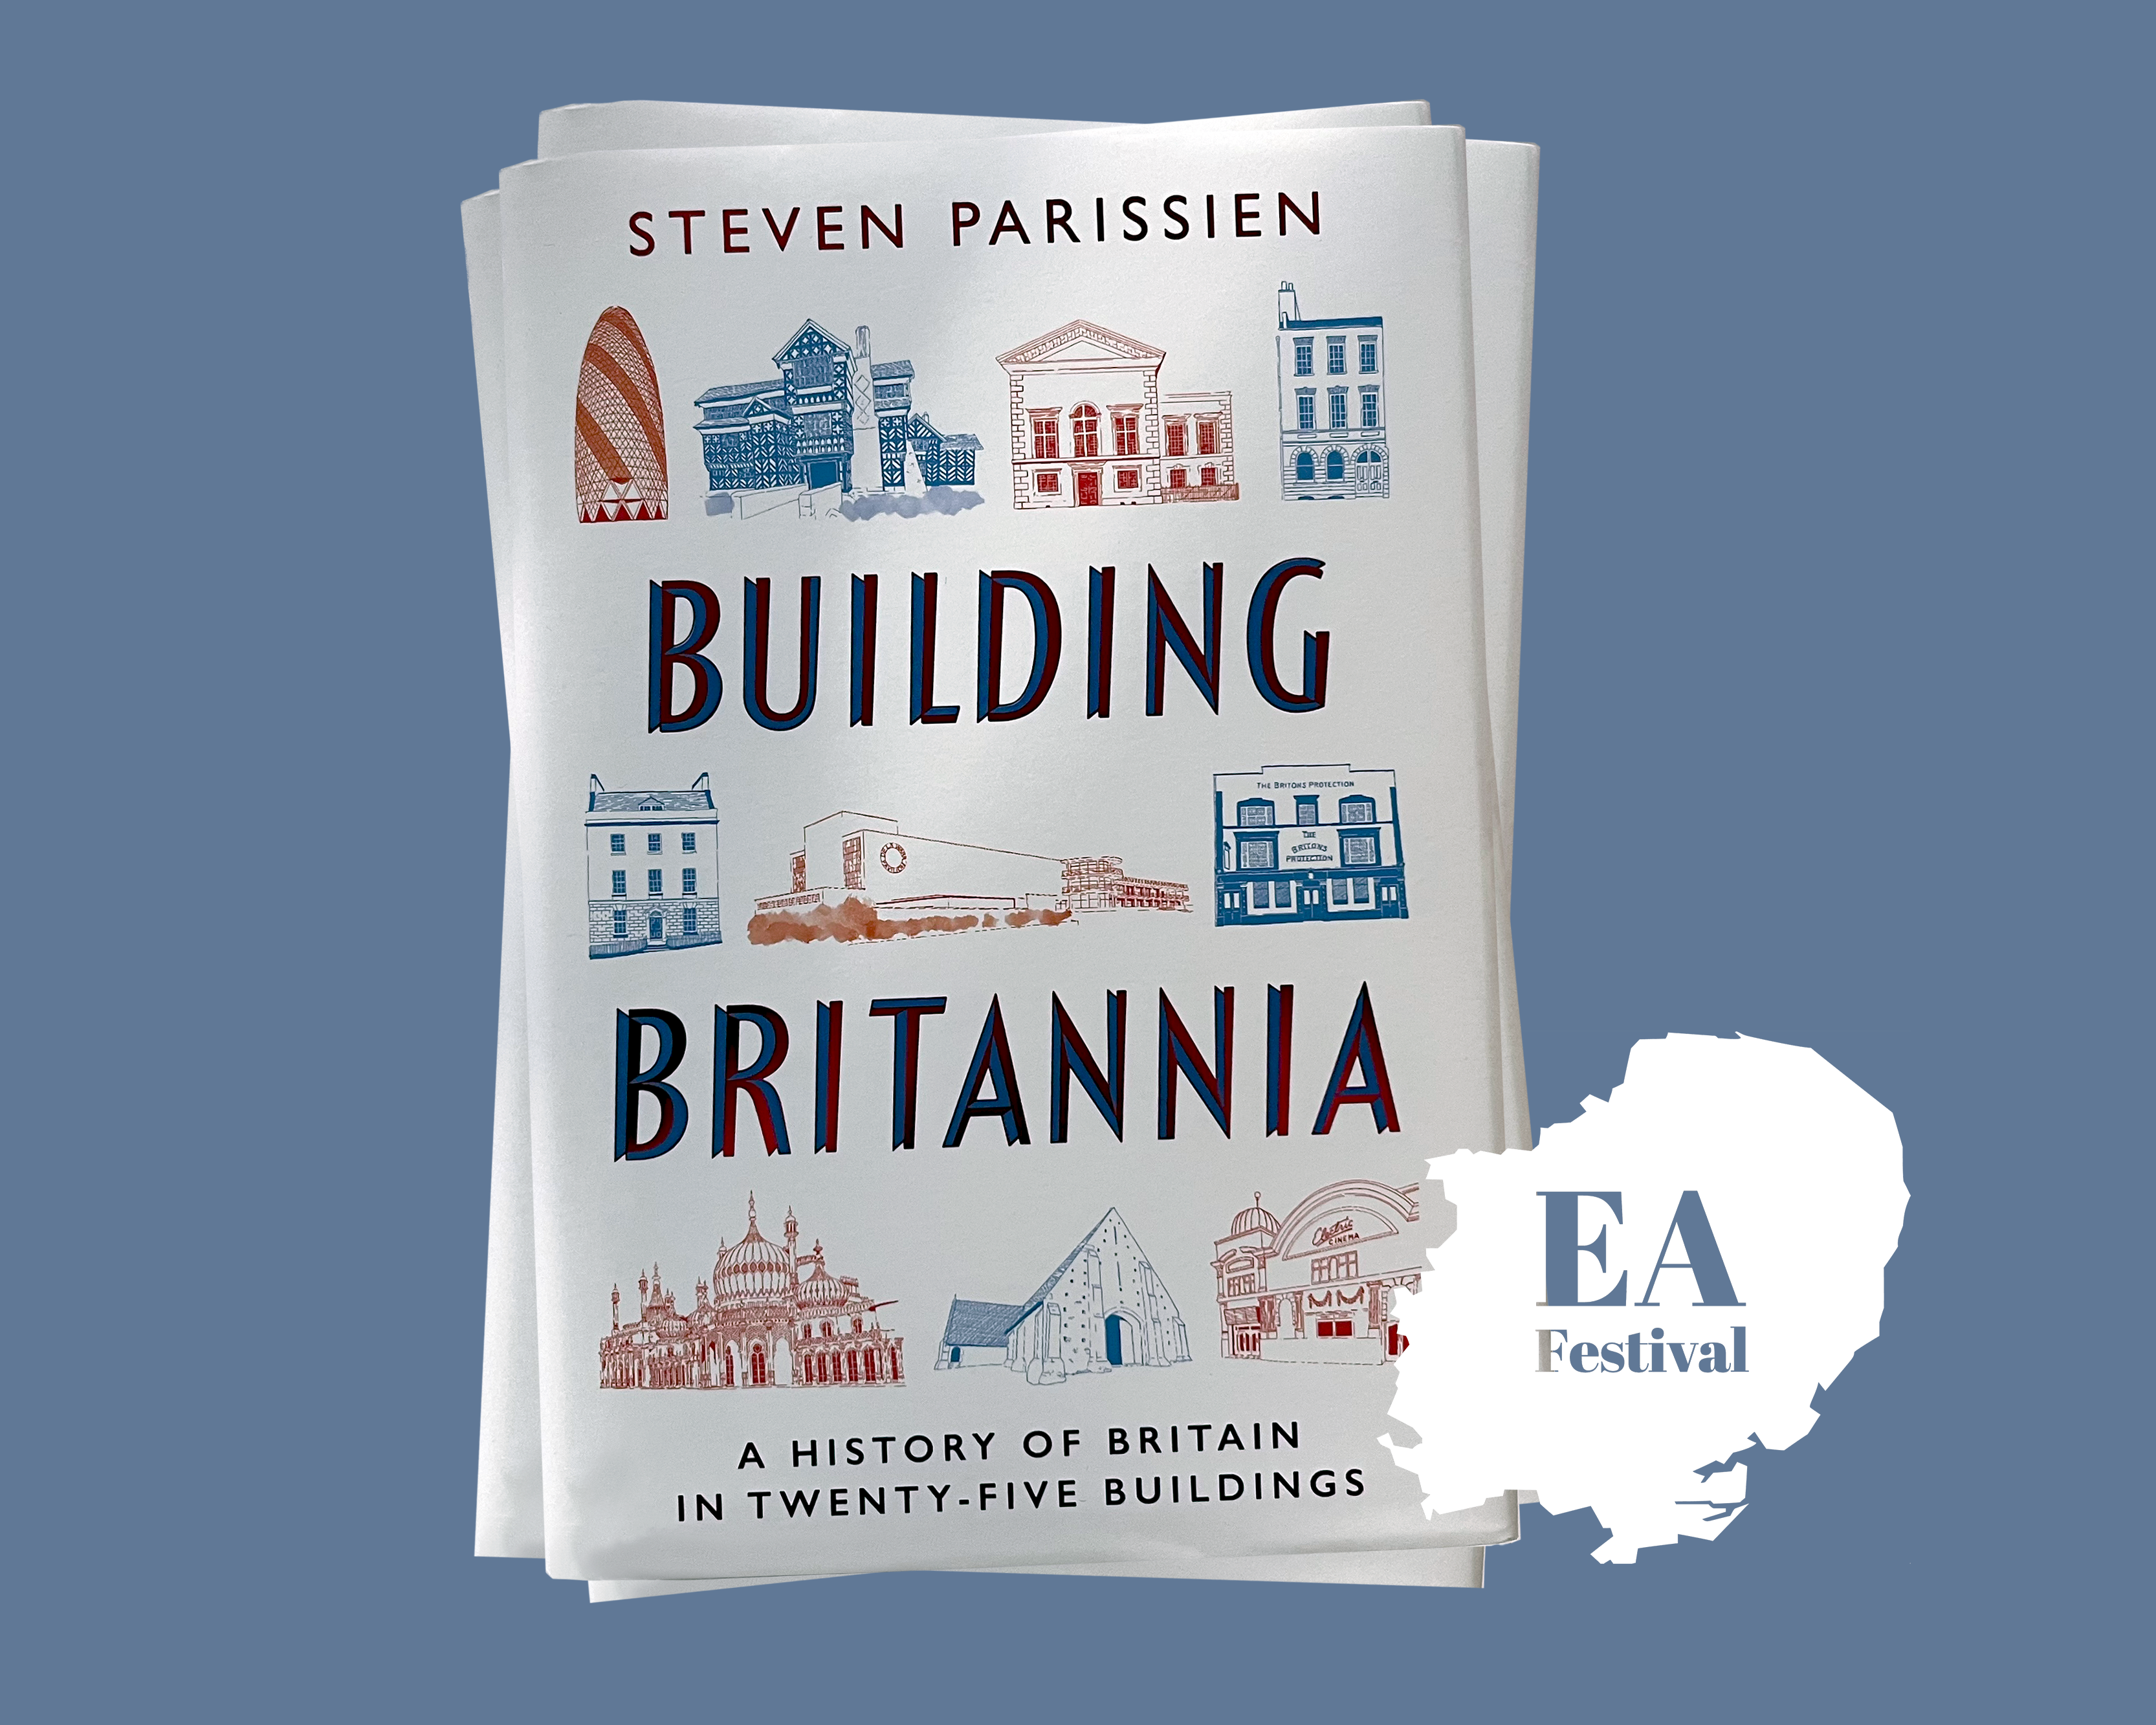 An image of the cover of Dr Steven Parissien's book Building Britannia:A History of Britain in Twenty-Five Buildings, with EA Festival logo overlayed.